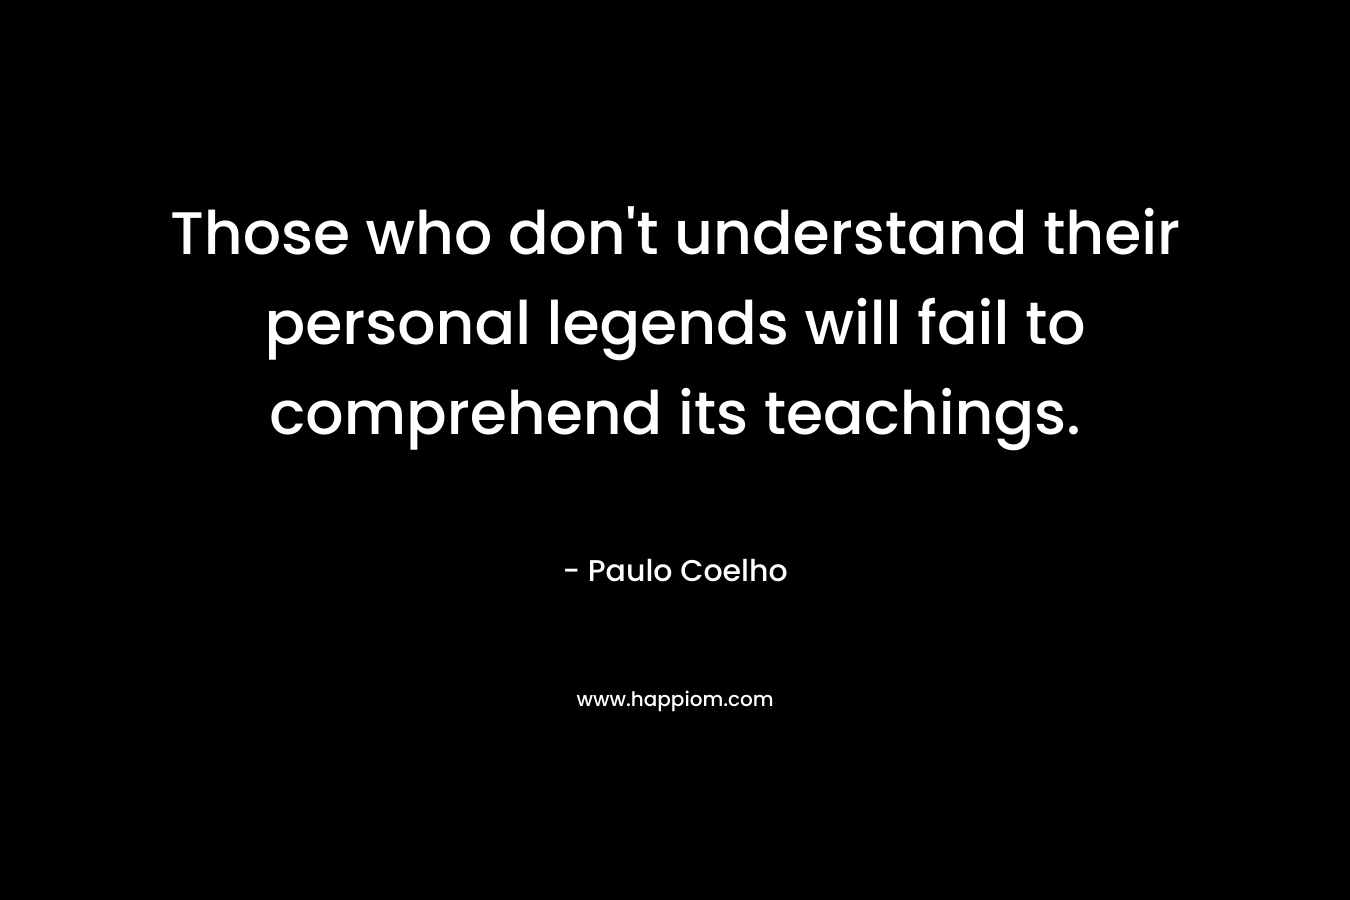 Those who don’t understand their personal legends will fail to comprehend its teachings. – Paulo Coelho